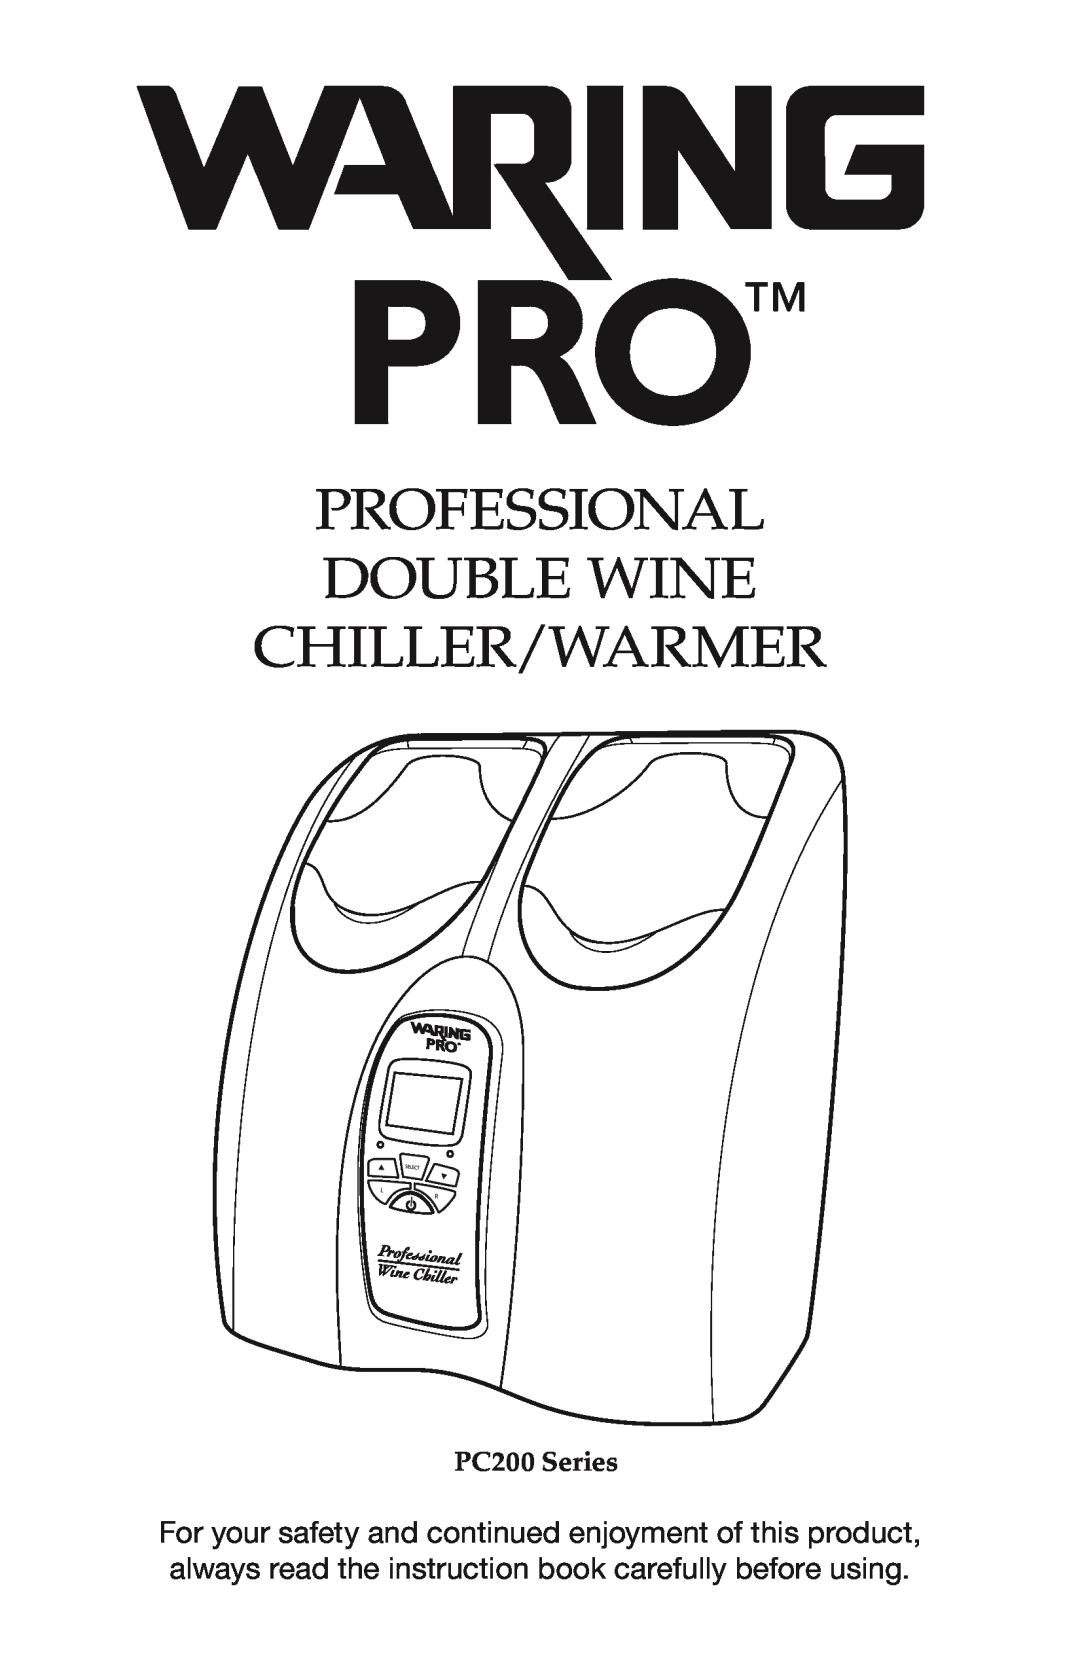 Waring manual Professional Double Wine Chiller/Warmer, PC200 Series 